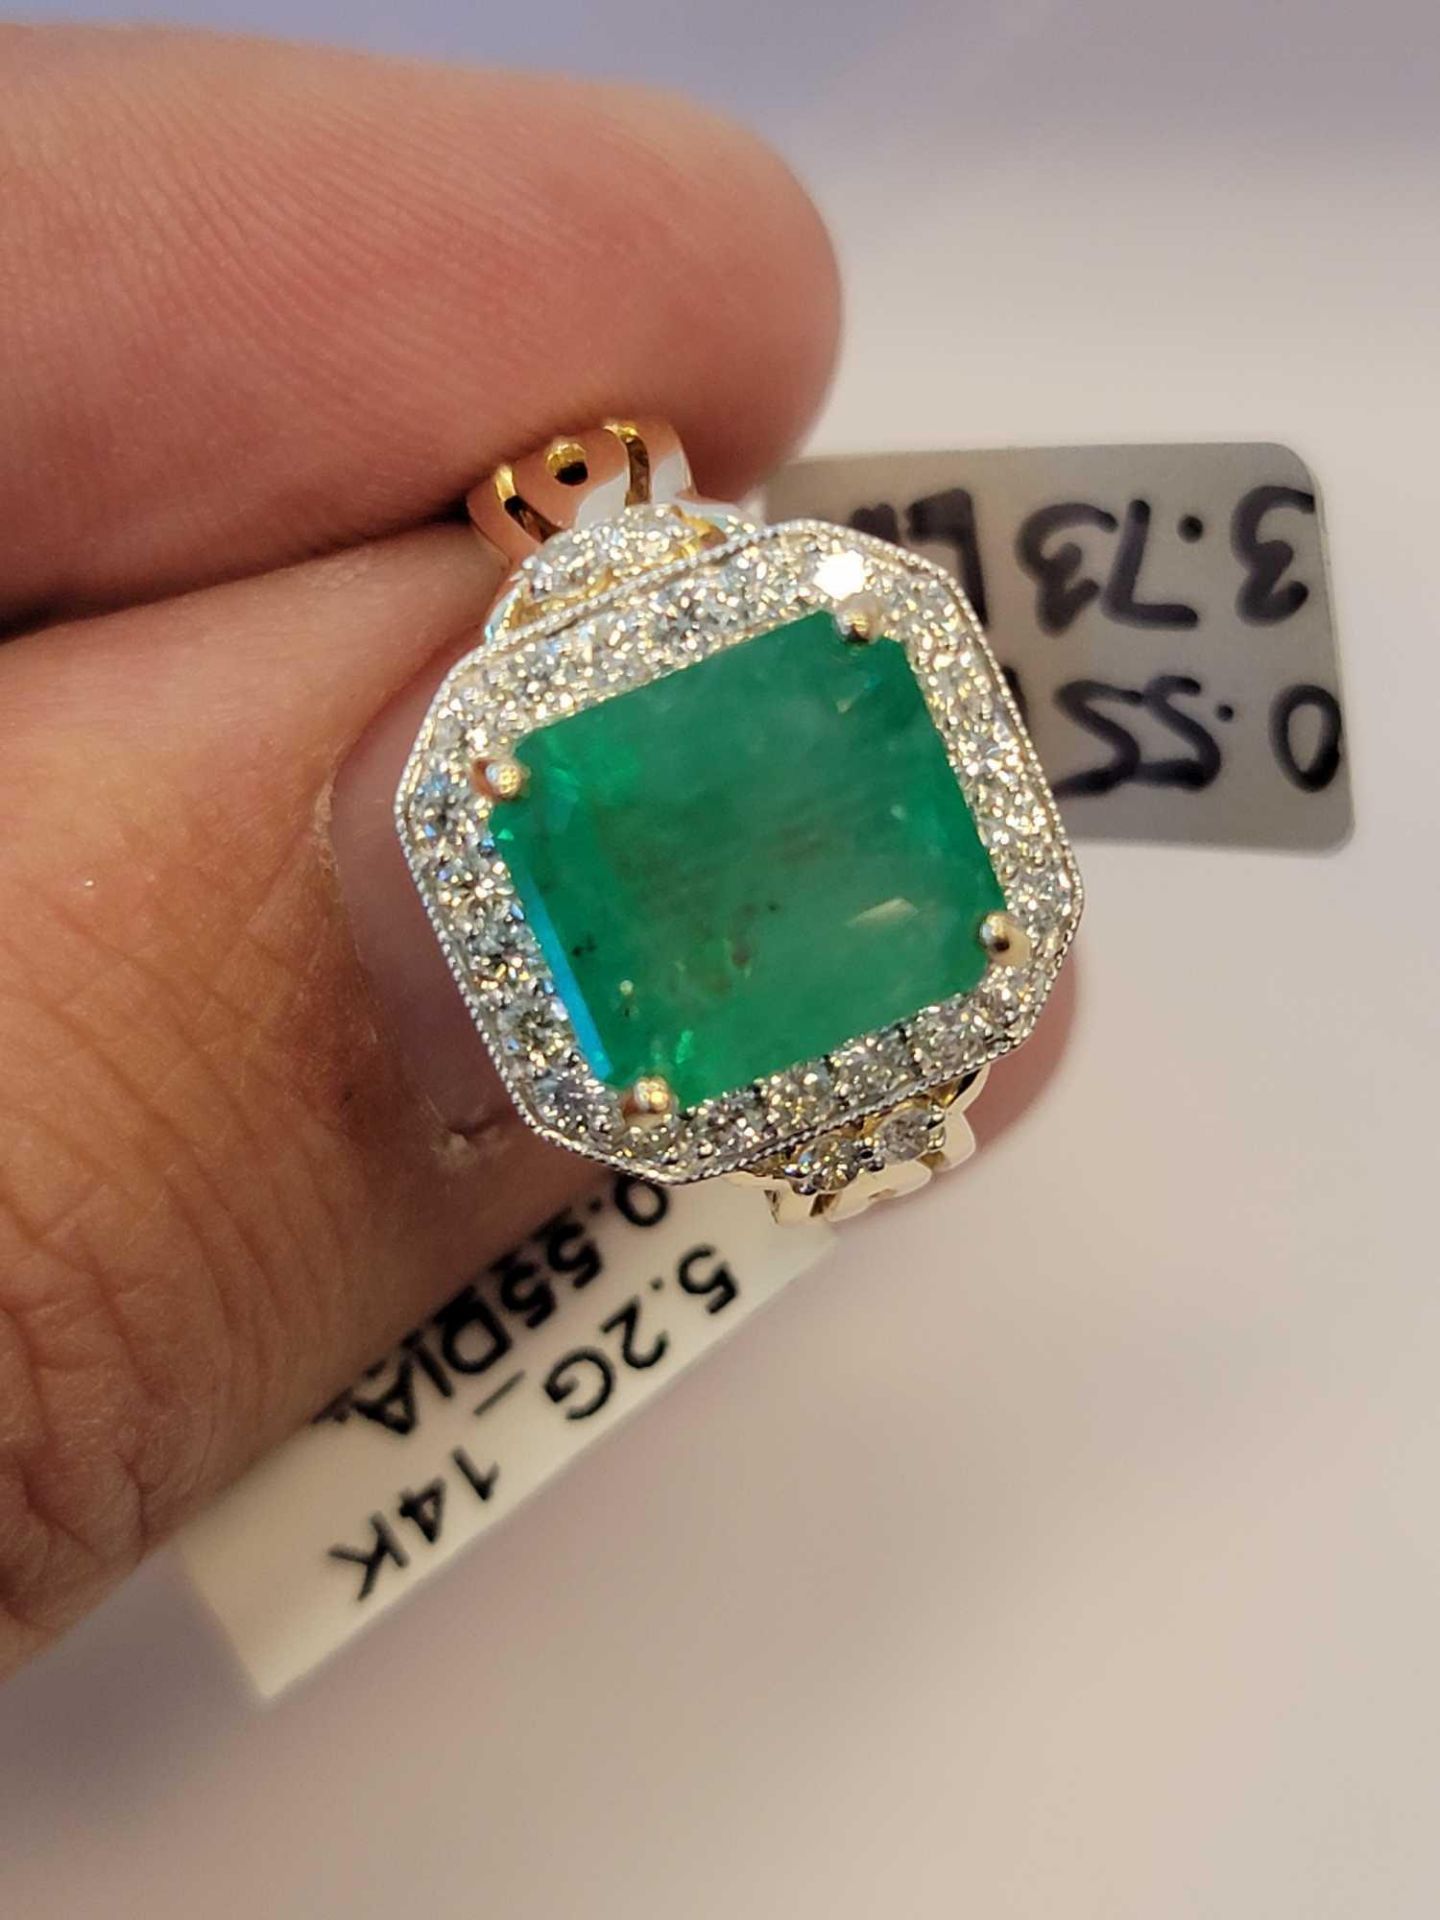 14KT yellow gold diamond and emerald ring - Image 2 of 8